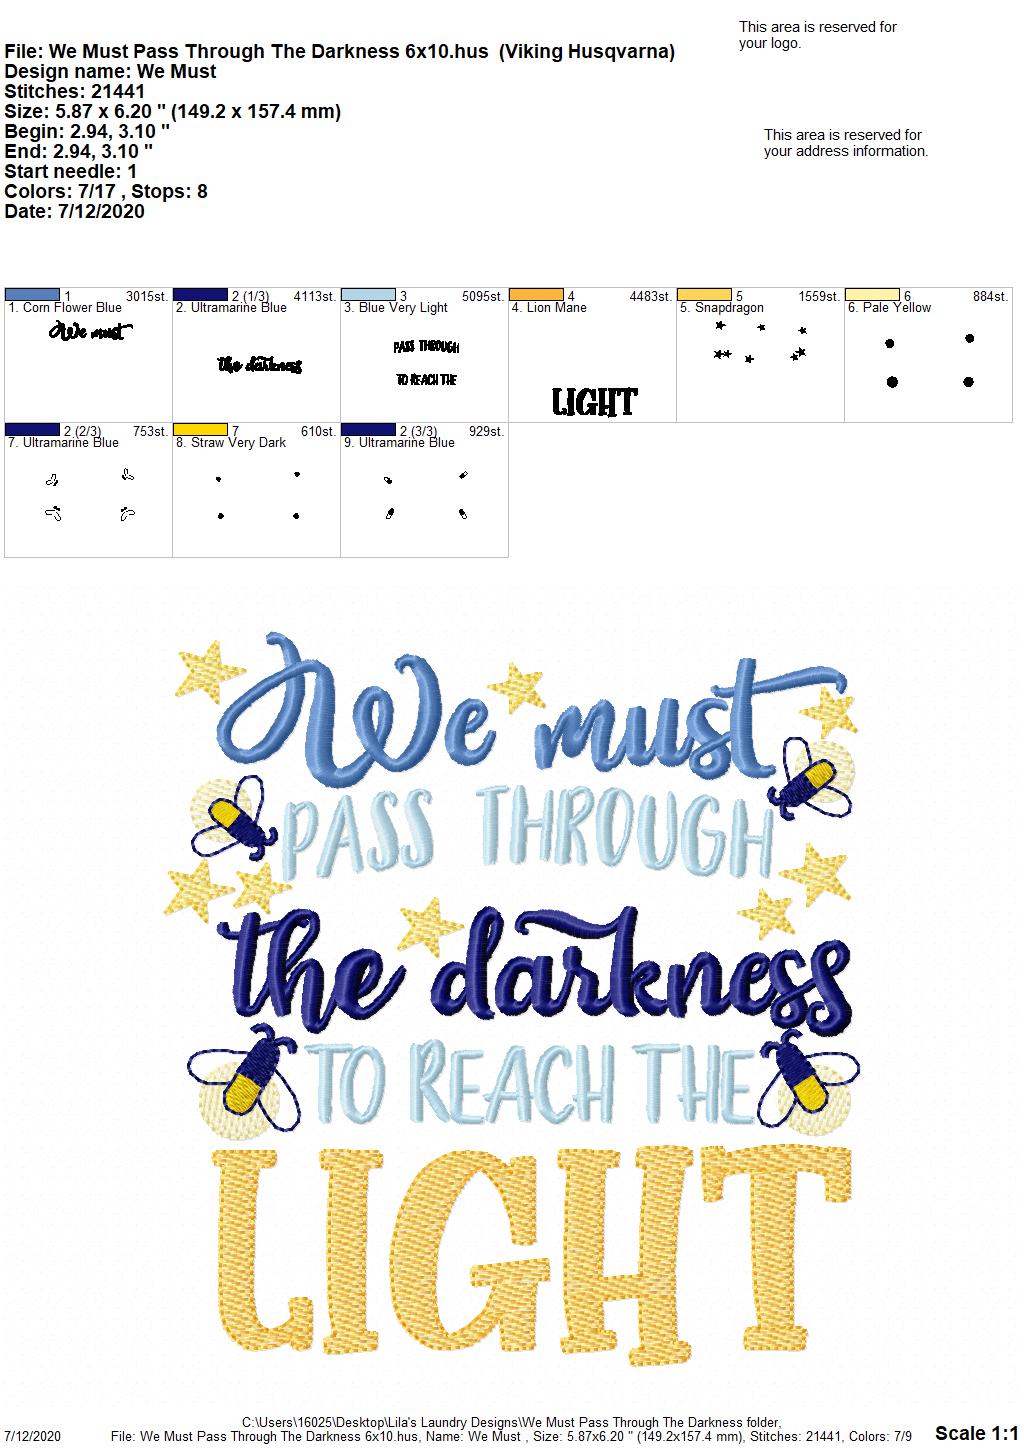 We Must Pass Through The Darkness - 2 Sizes - Digital Embroidery Design